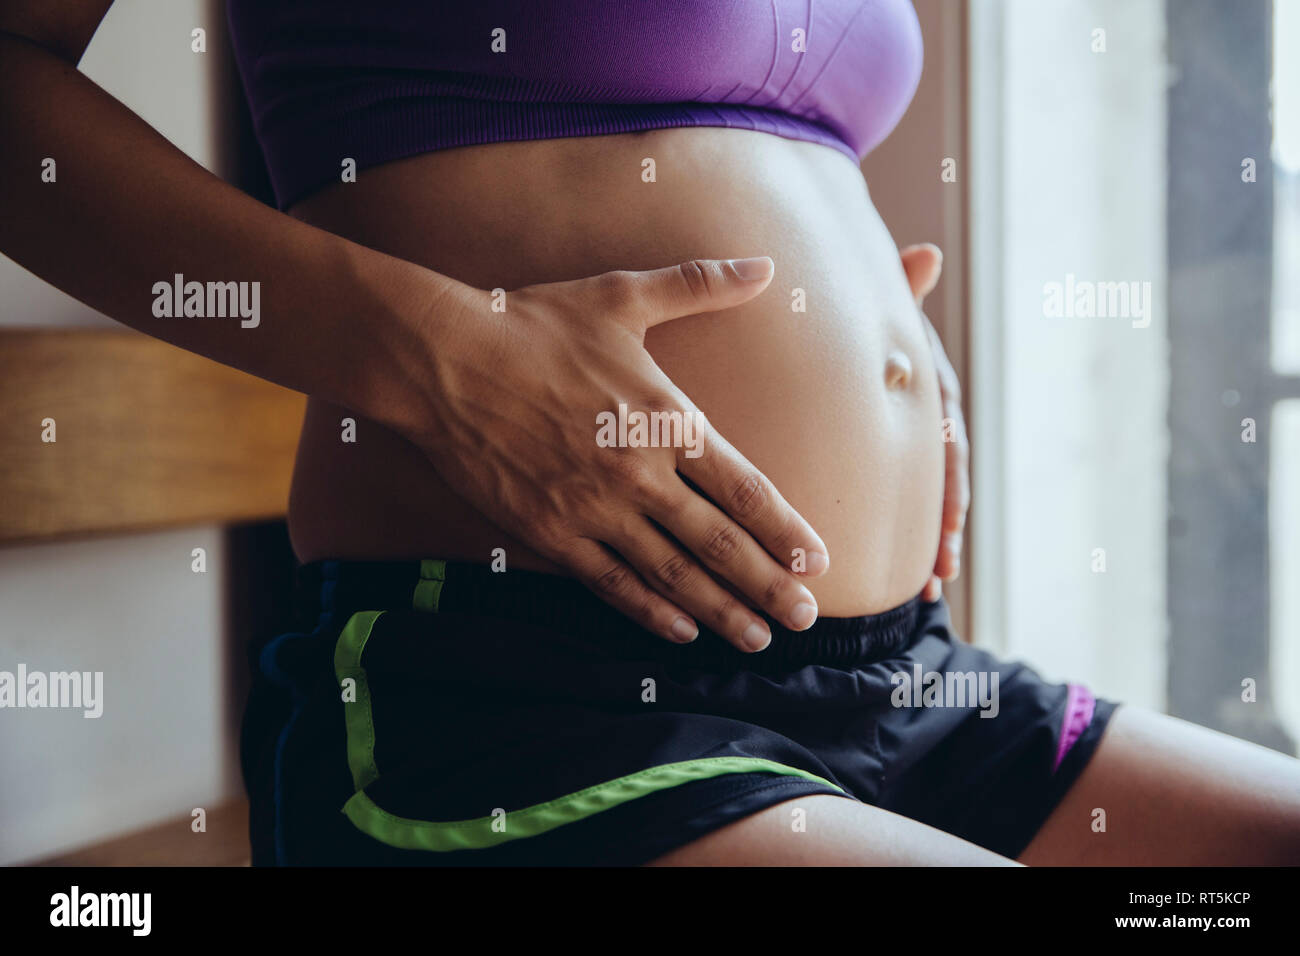 Enceinte sportive woman holding her belly Banque D'Images